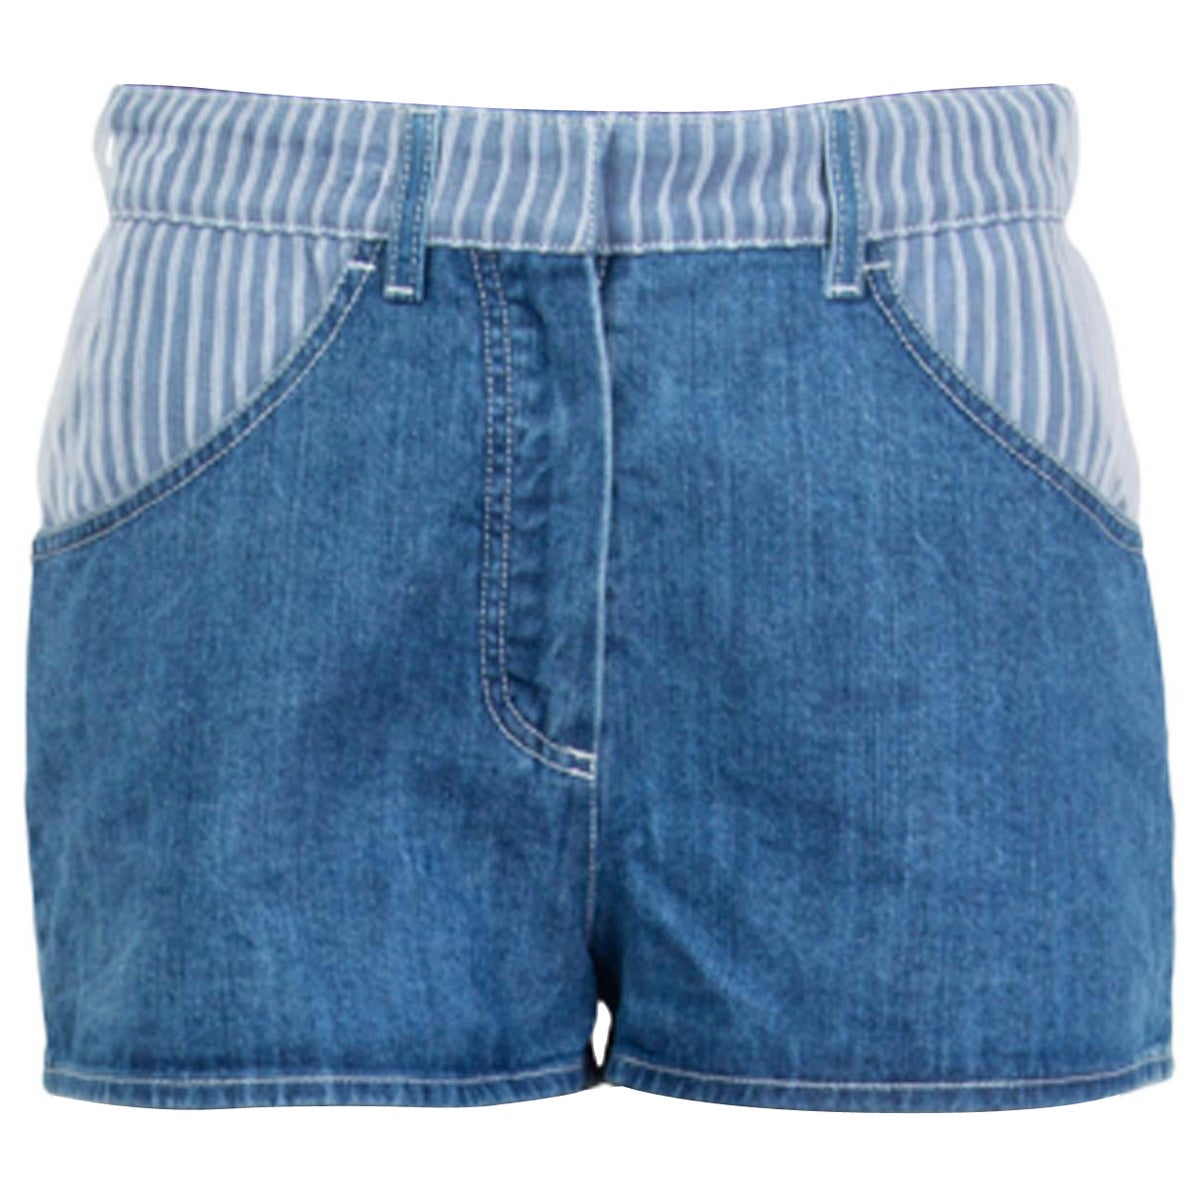 Chloé Cotton Chloé Other Materials Pants in Blue Save 50% Womens Clothing Shorts Knee-length shorts and long shorts 